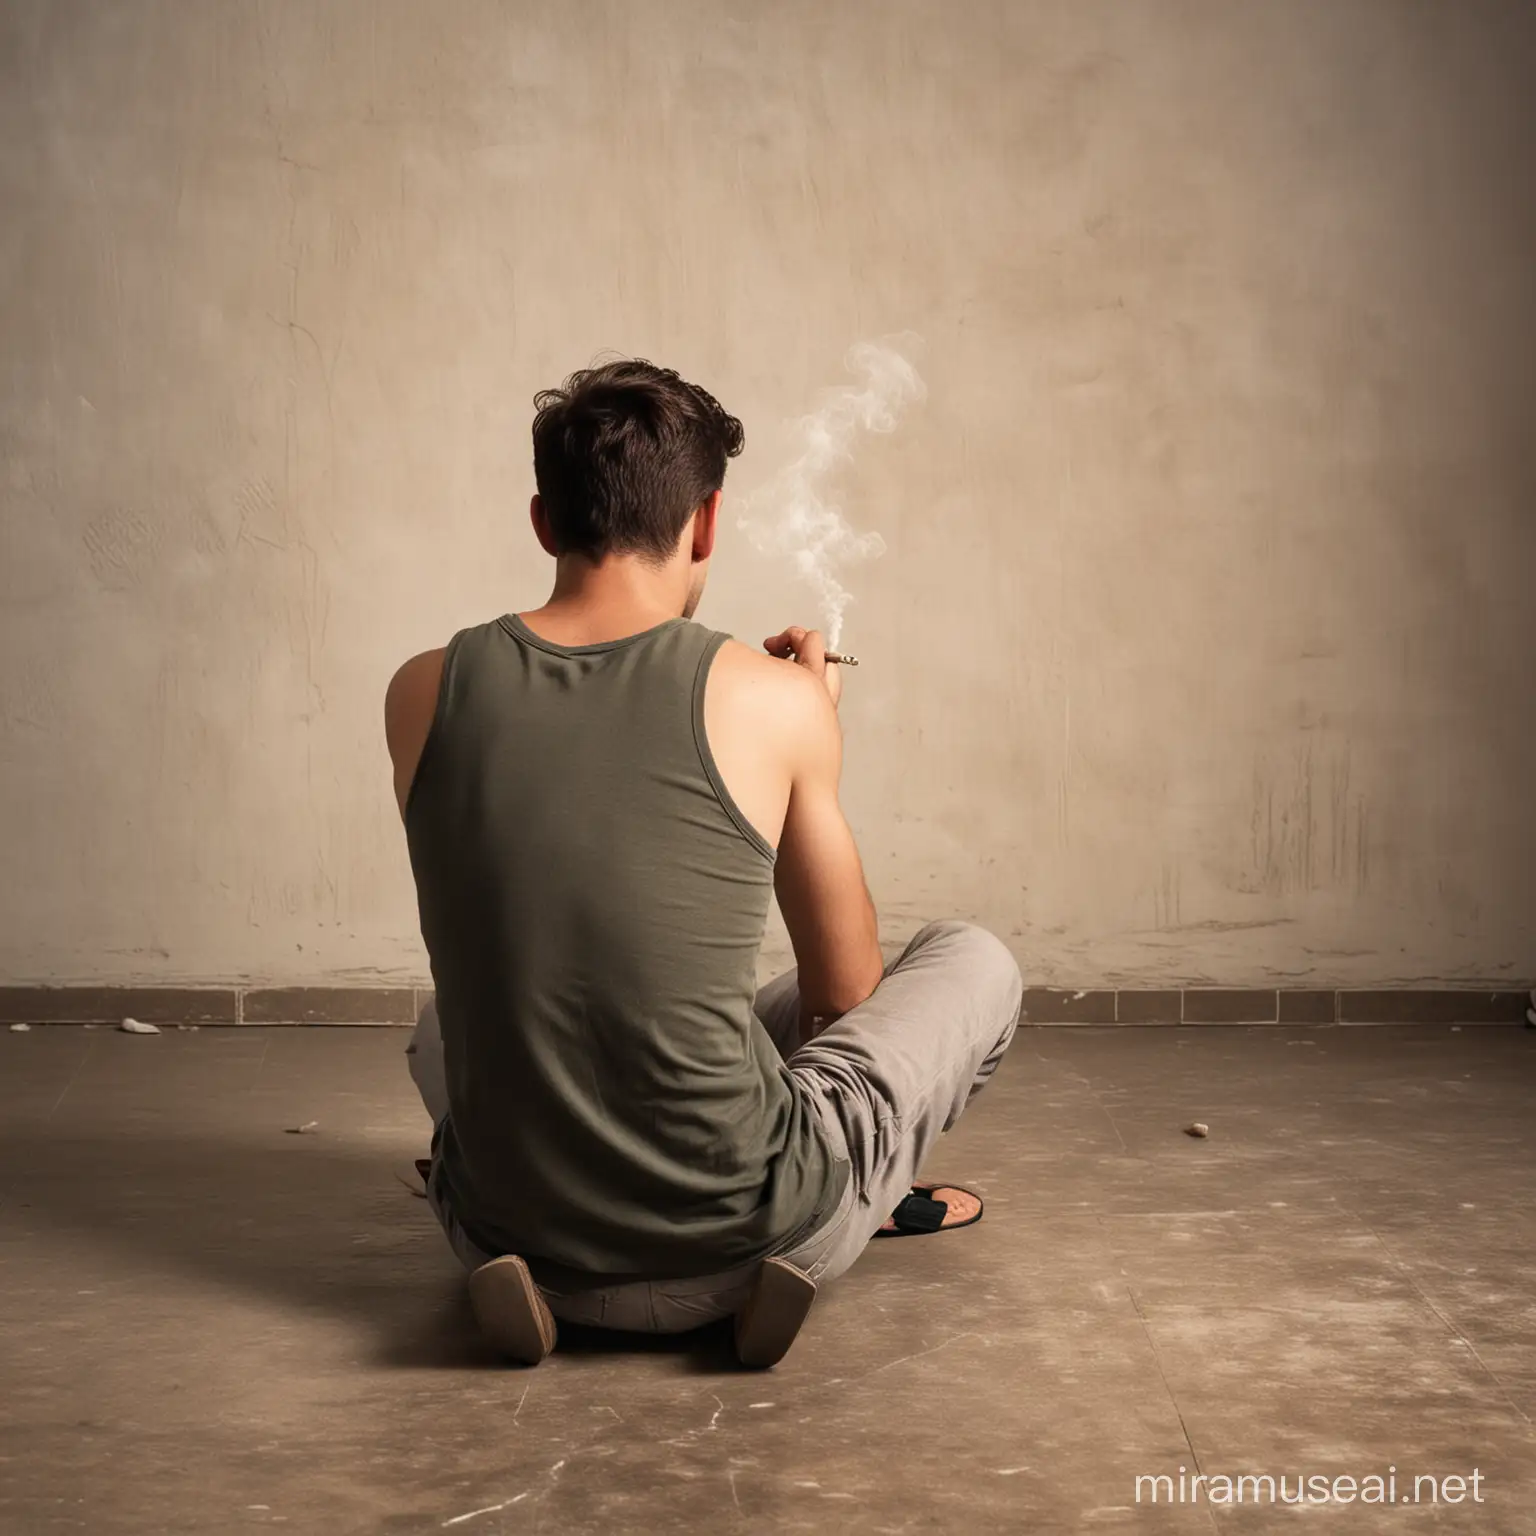 Back view. a man sitting on the floor smoking.